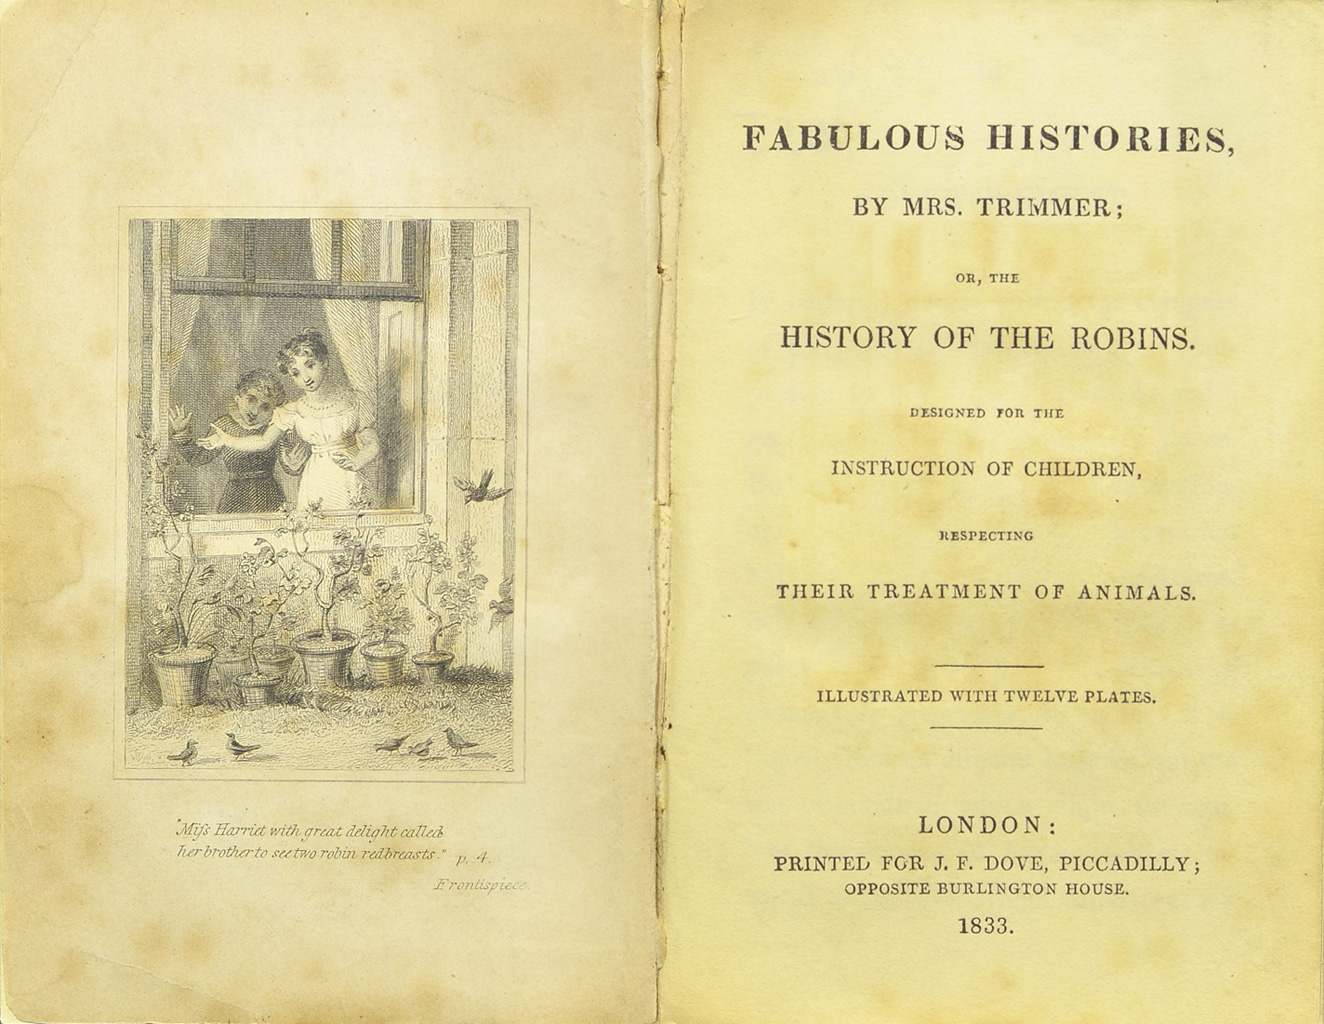 Exhibit Materials of Fabulous histories, or, The history of the robins : designed for the instruction of children, respecting their treatment of animals